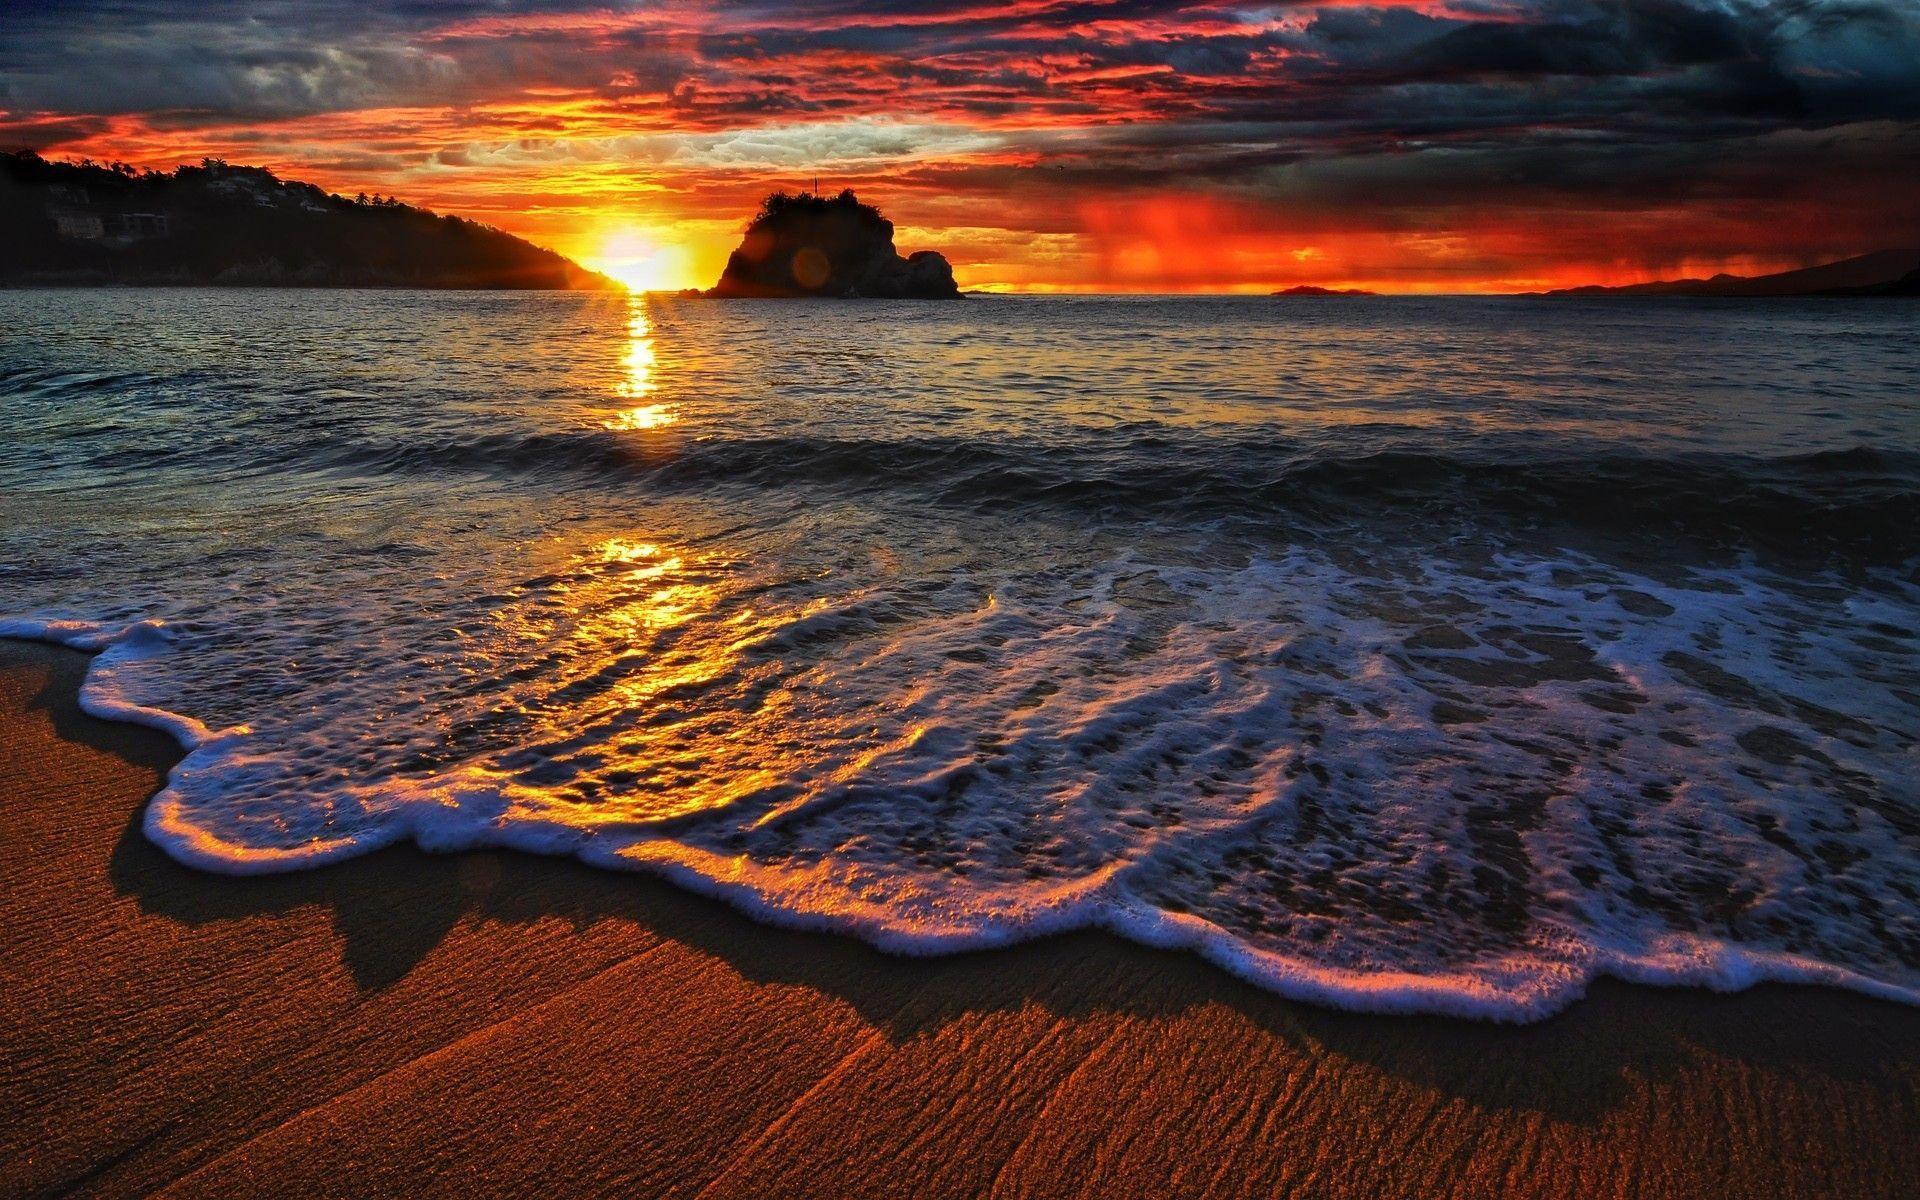 Image For > Ocean Sunset Wallpapers Hd